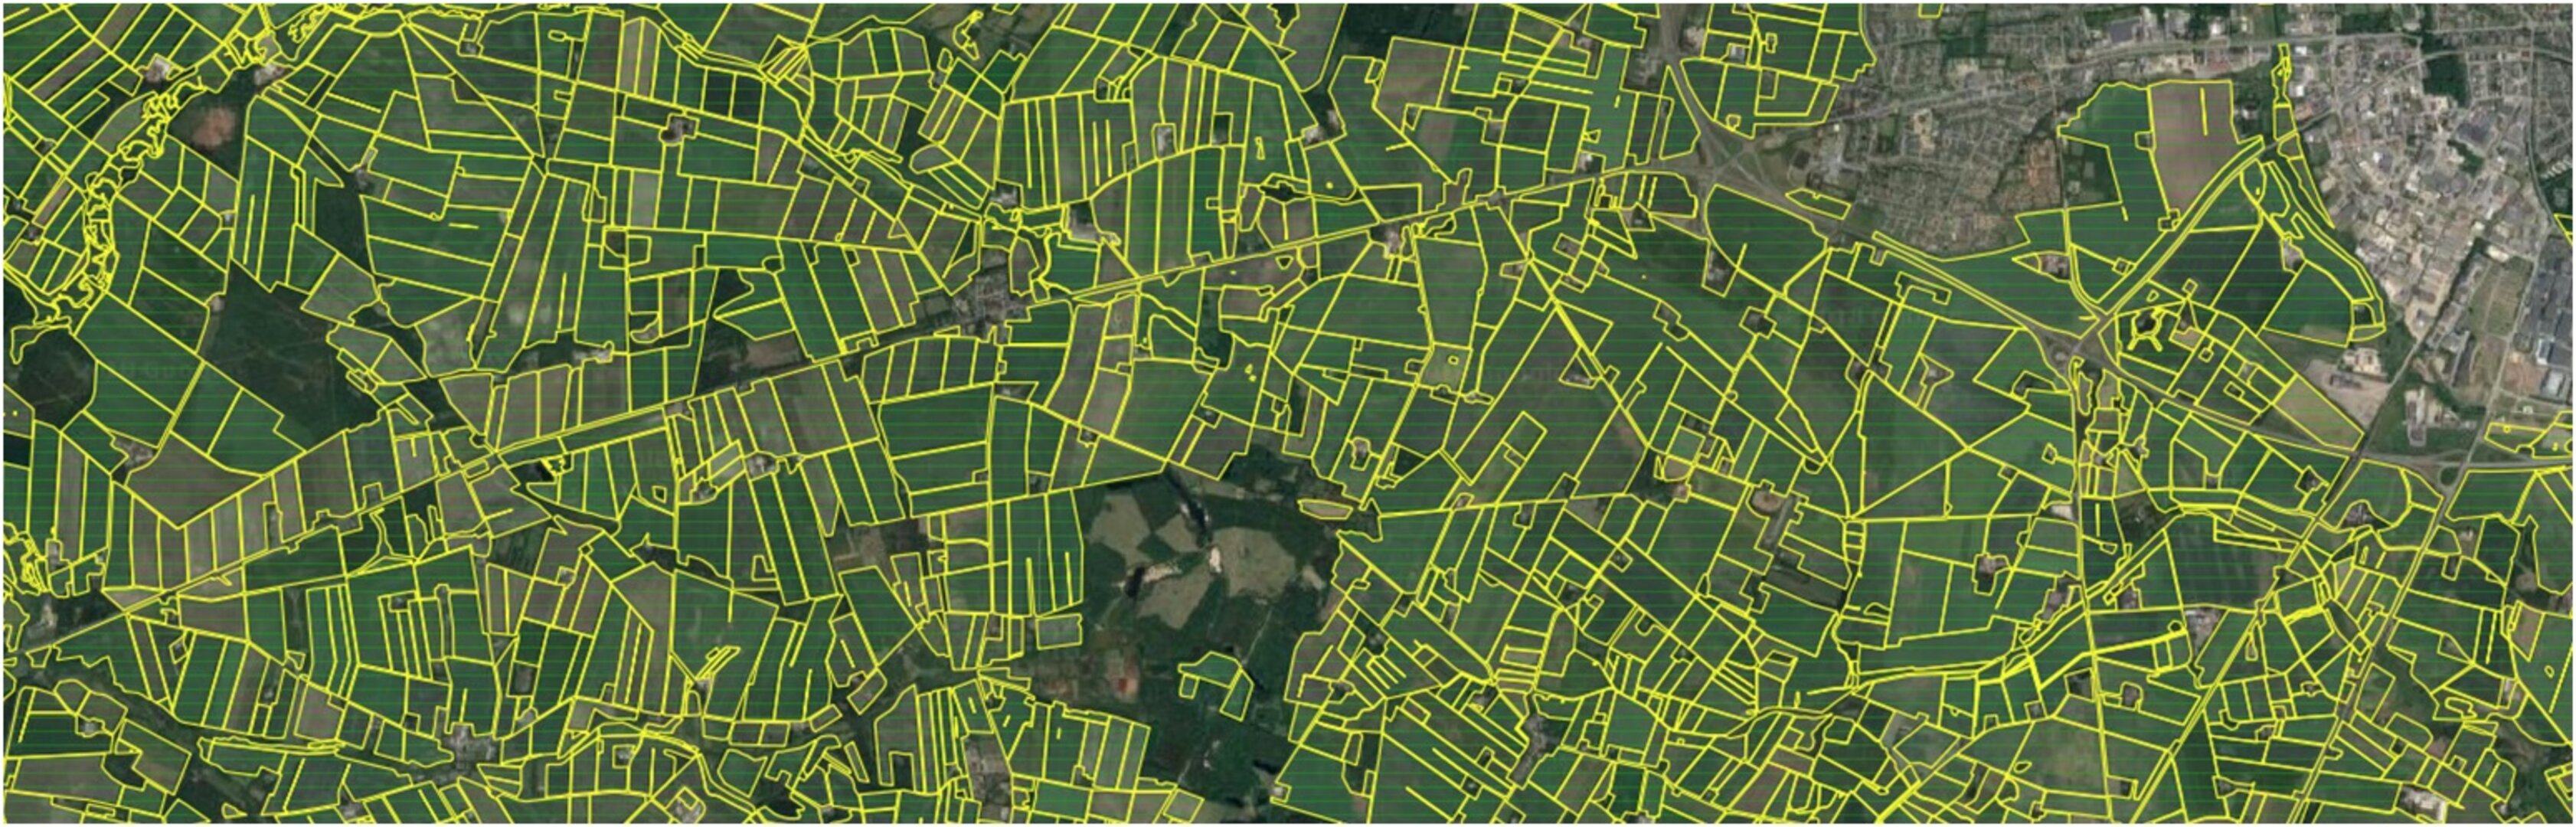 Satellite monitoring and Artificial Intelligence to boost precision farming